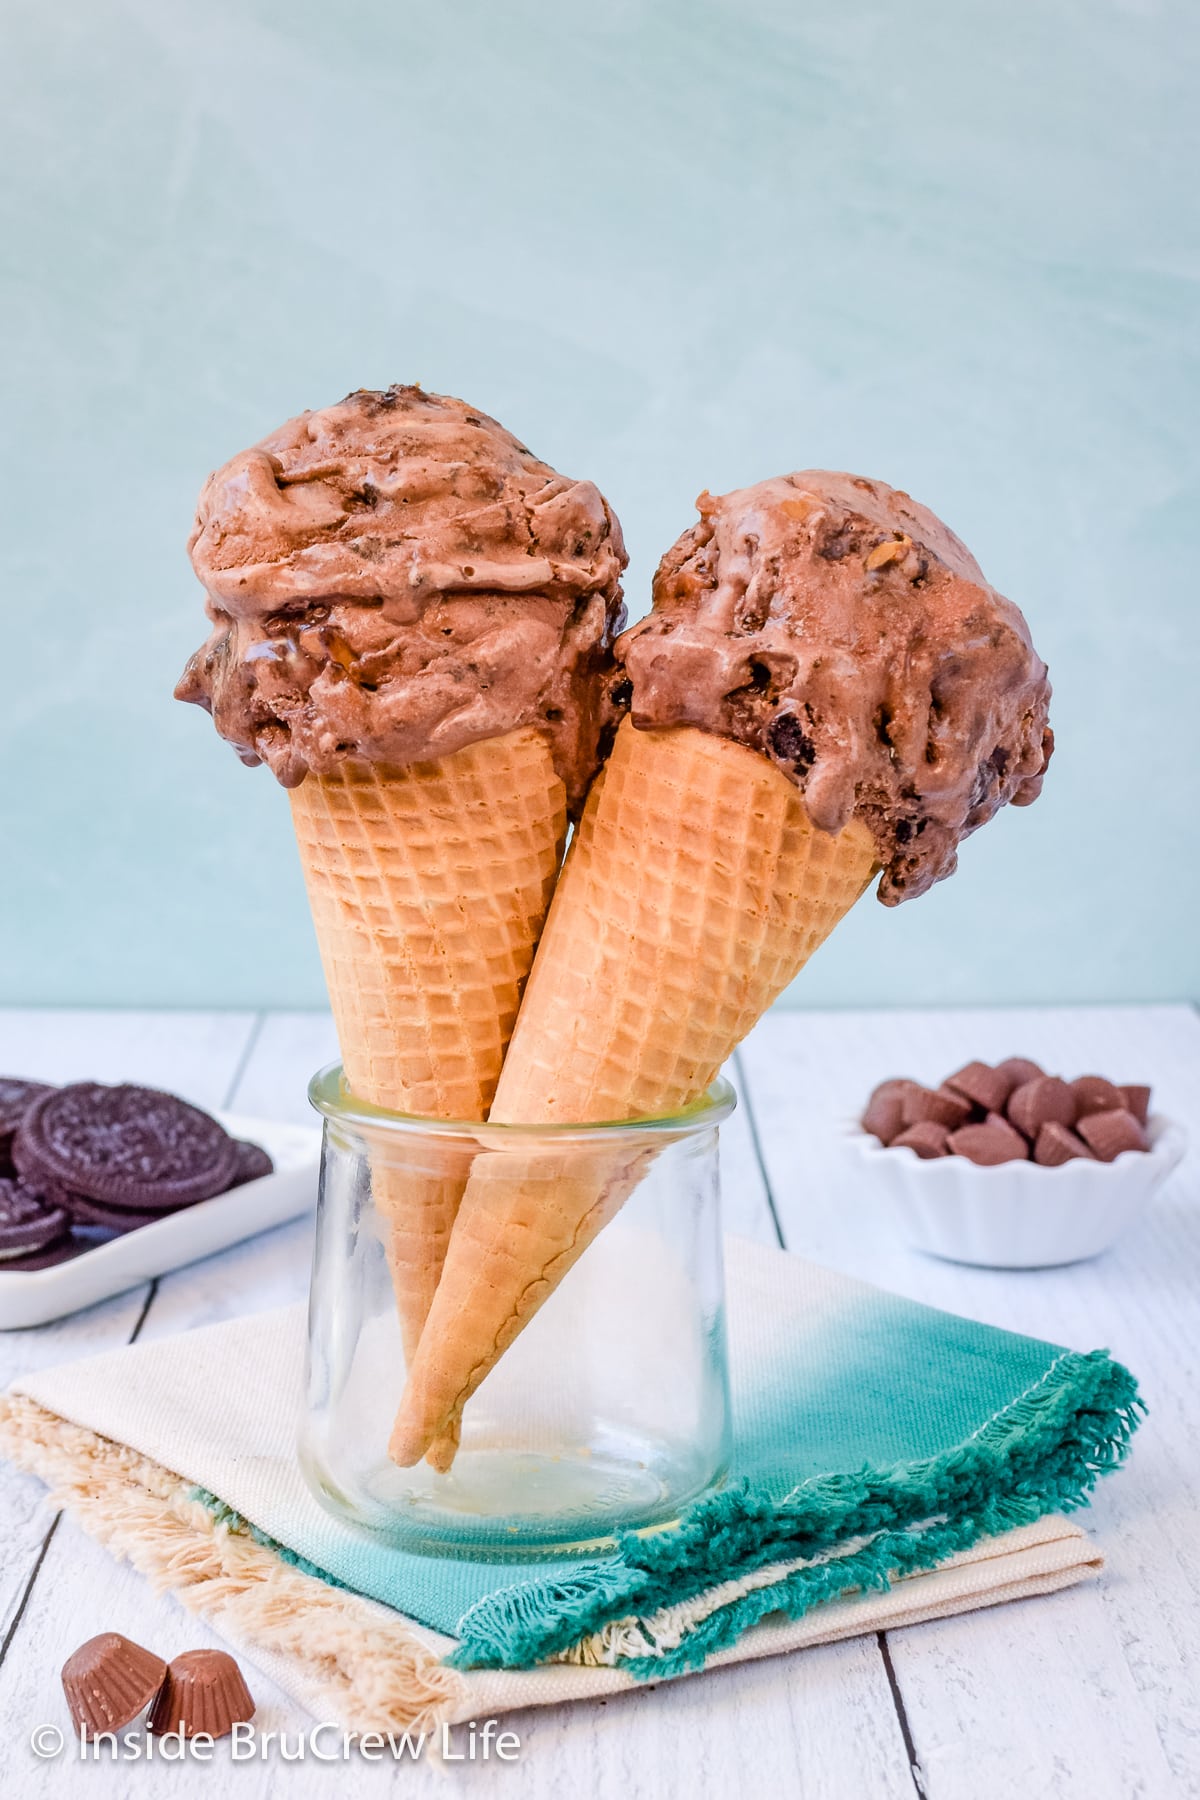 Two sugar cones with scoops of chocolate ice cream.